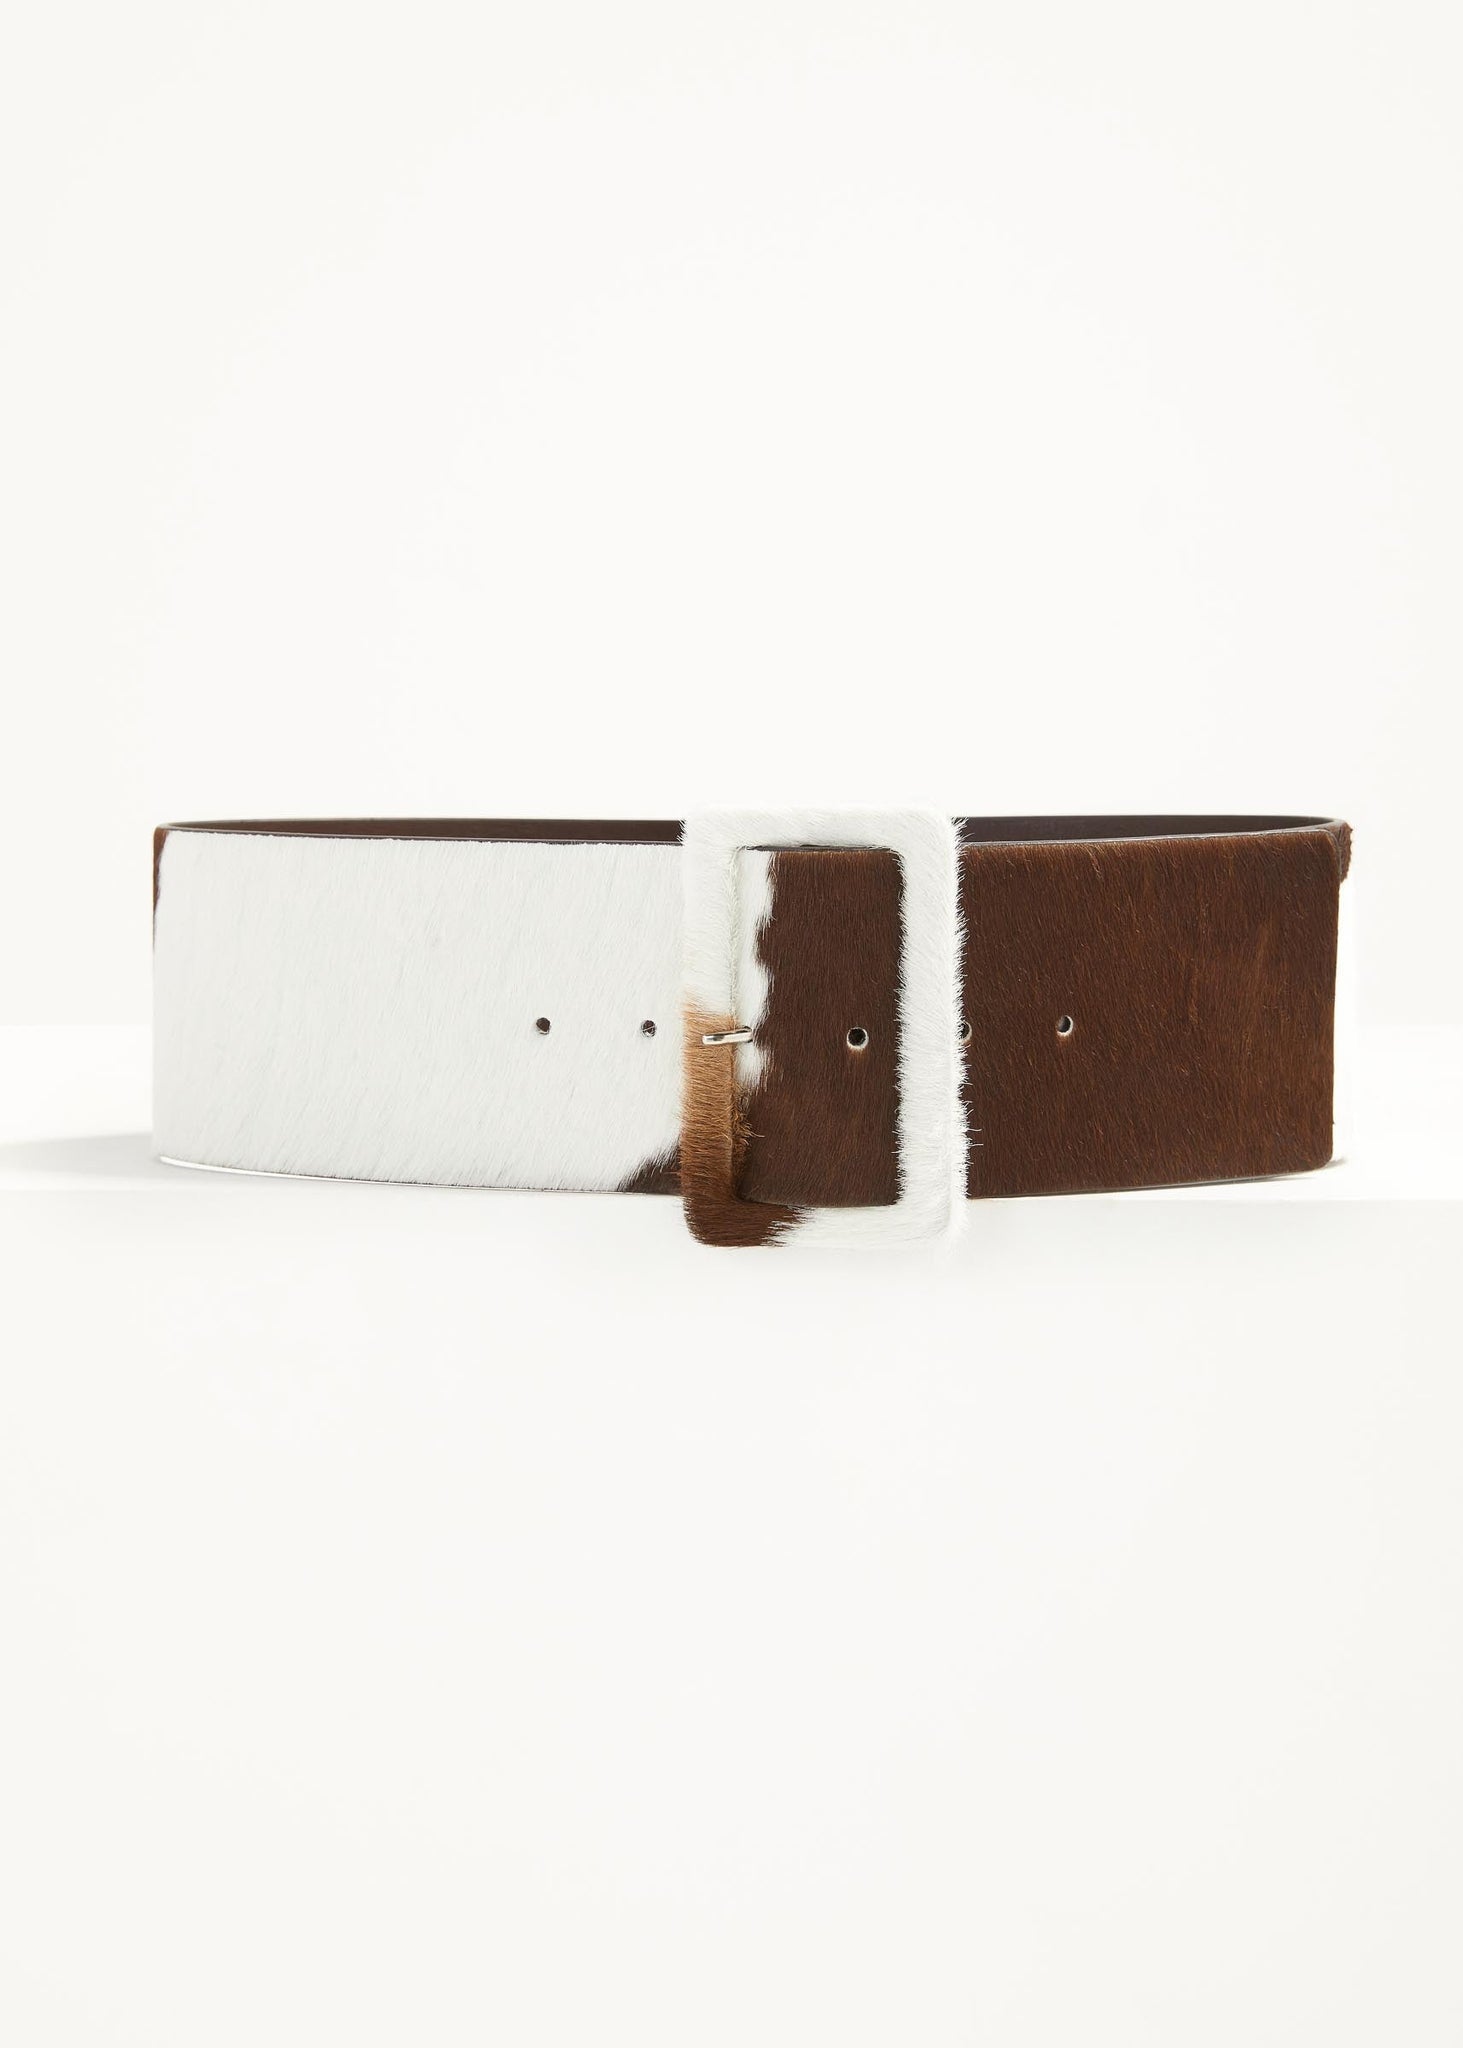 ISSI WIDE BELT in SPOTTED COWHIDE